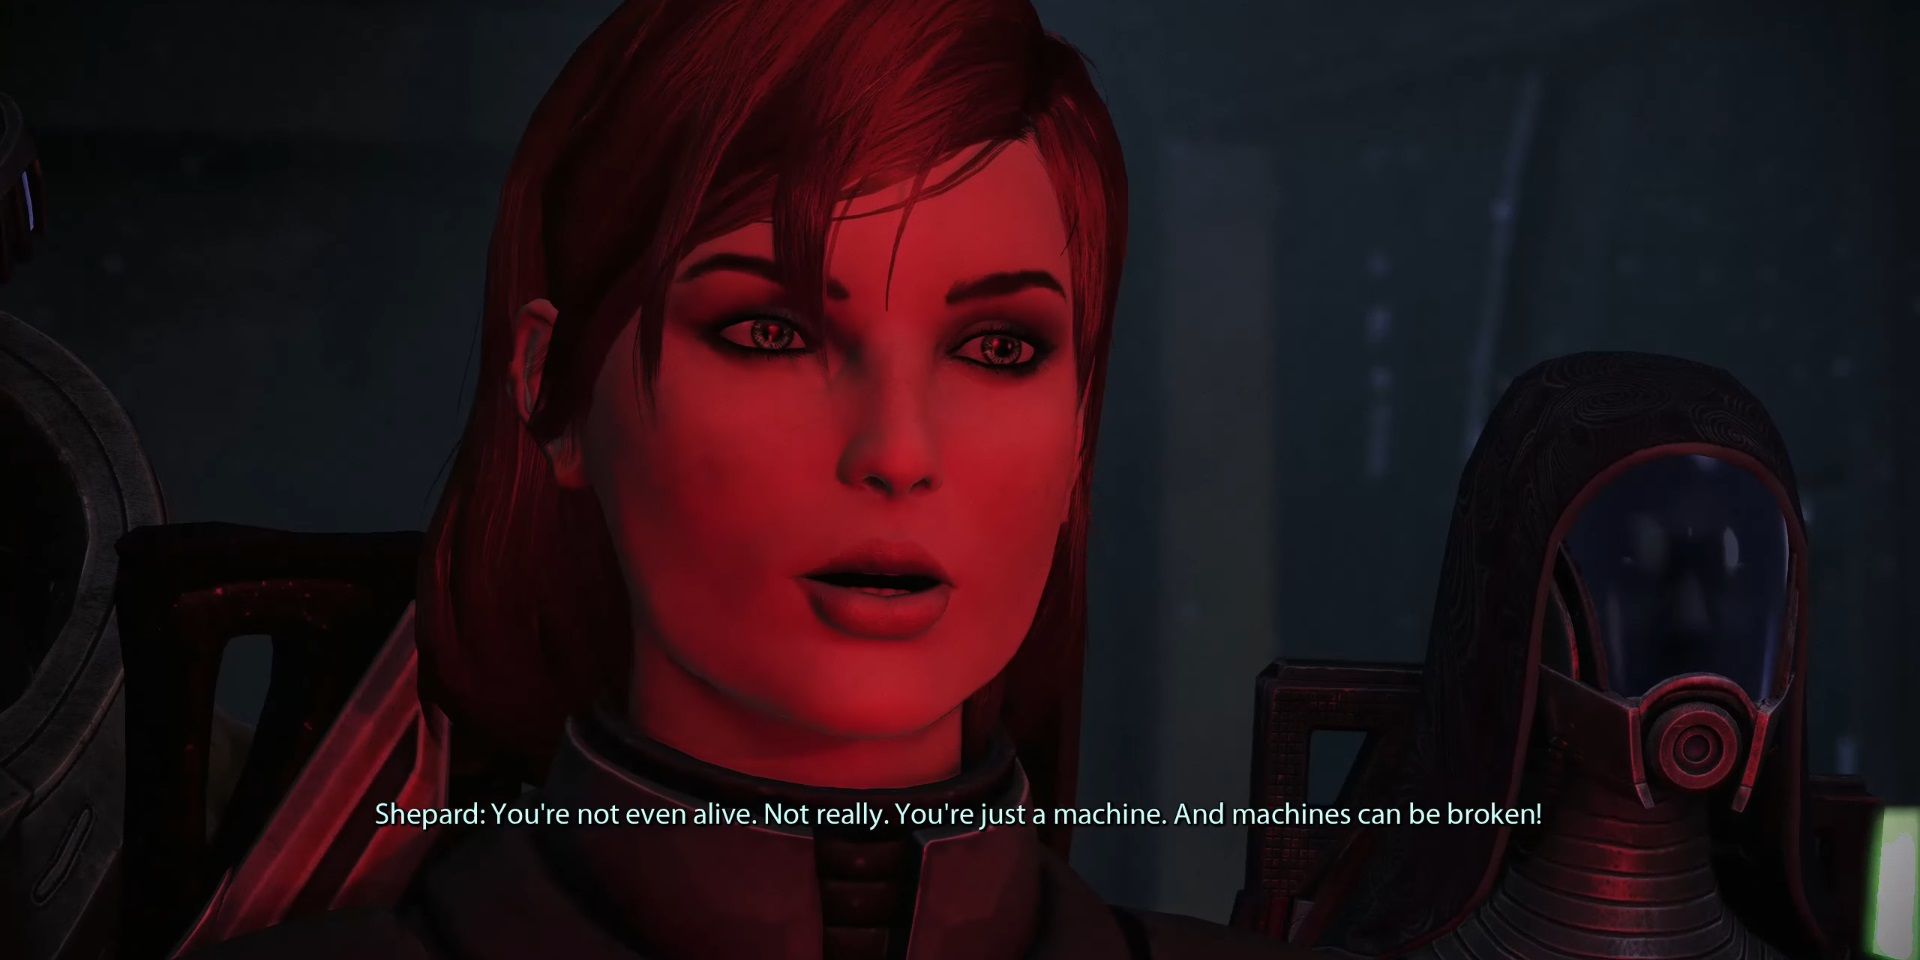 Mass Effect - Shepard says Reaper is just a machine